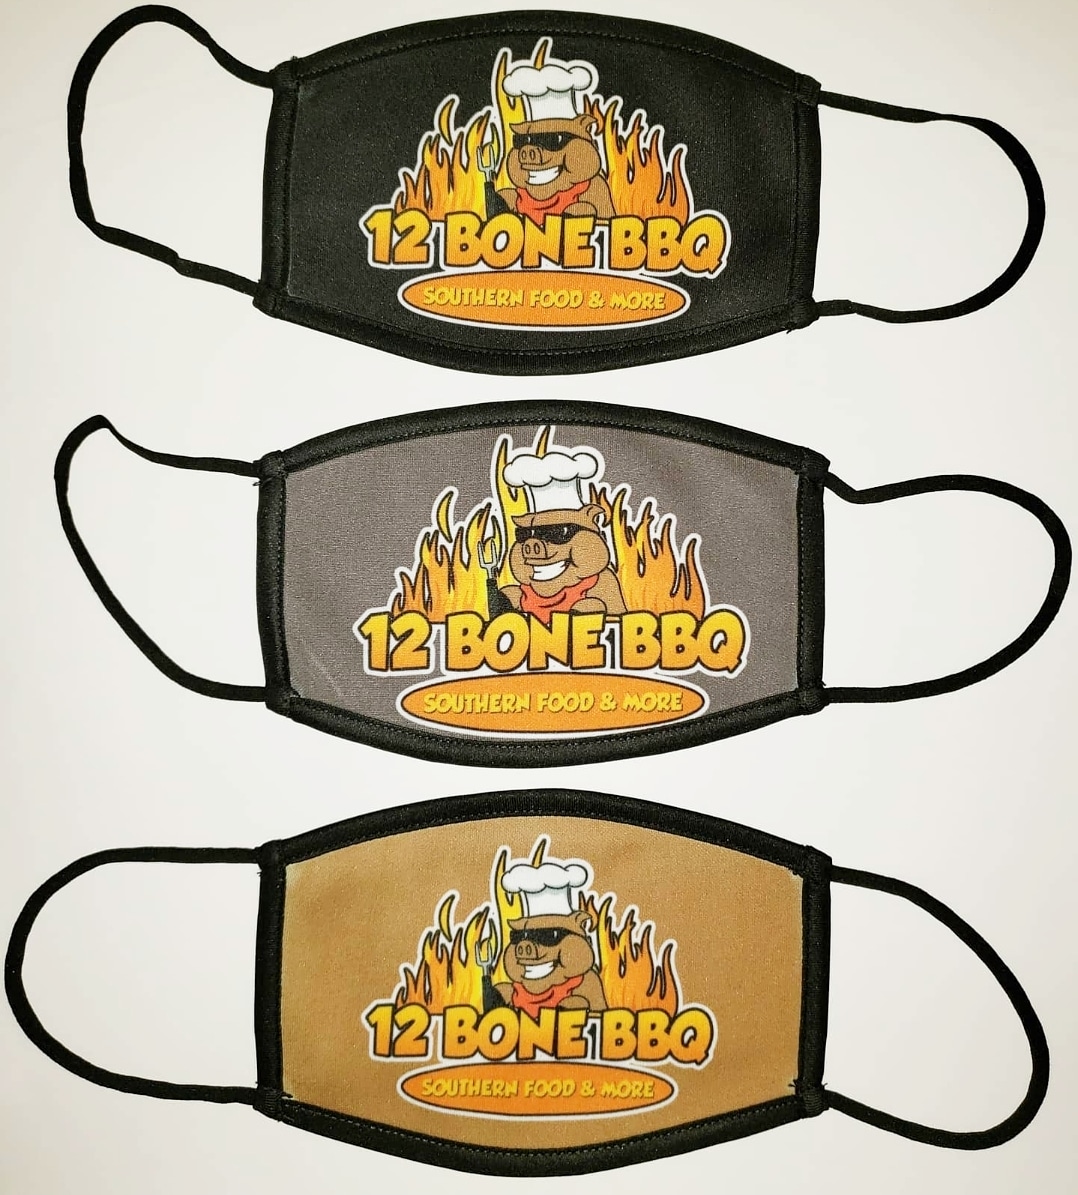 CUSTOM  FACE MASK made with sublimation printing